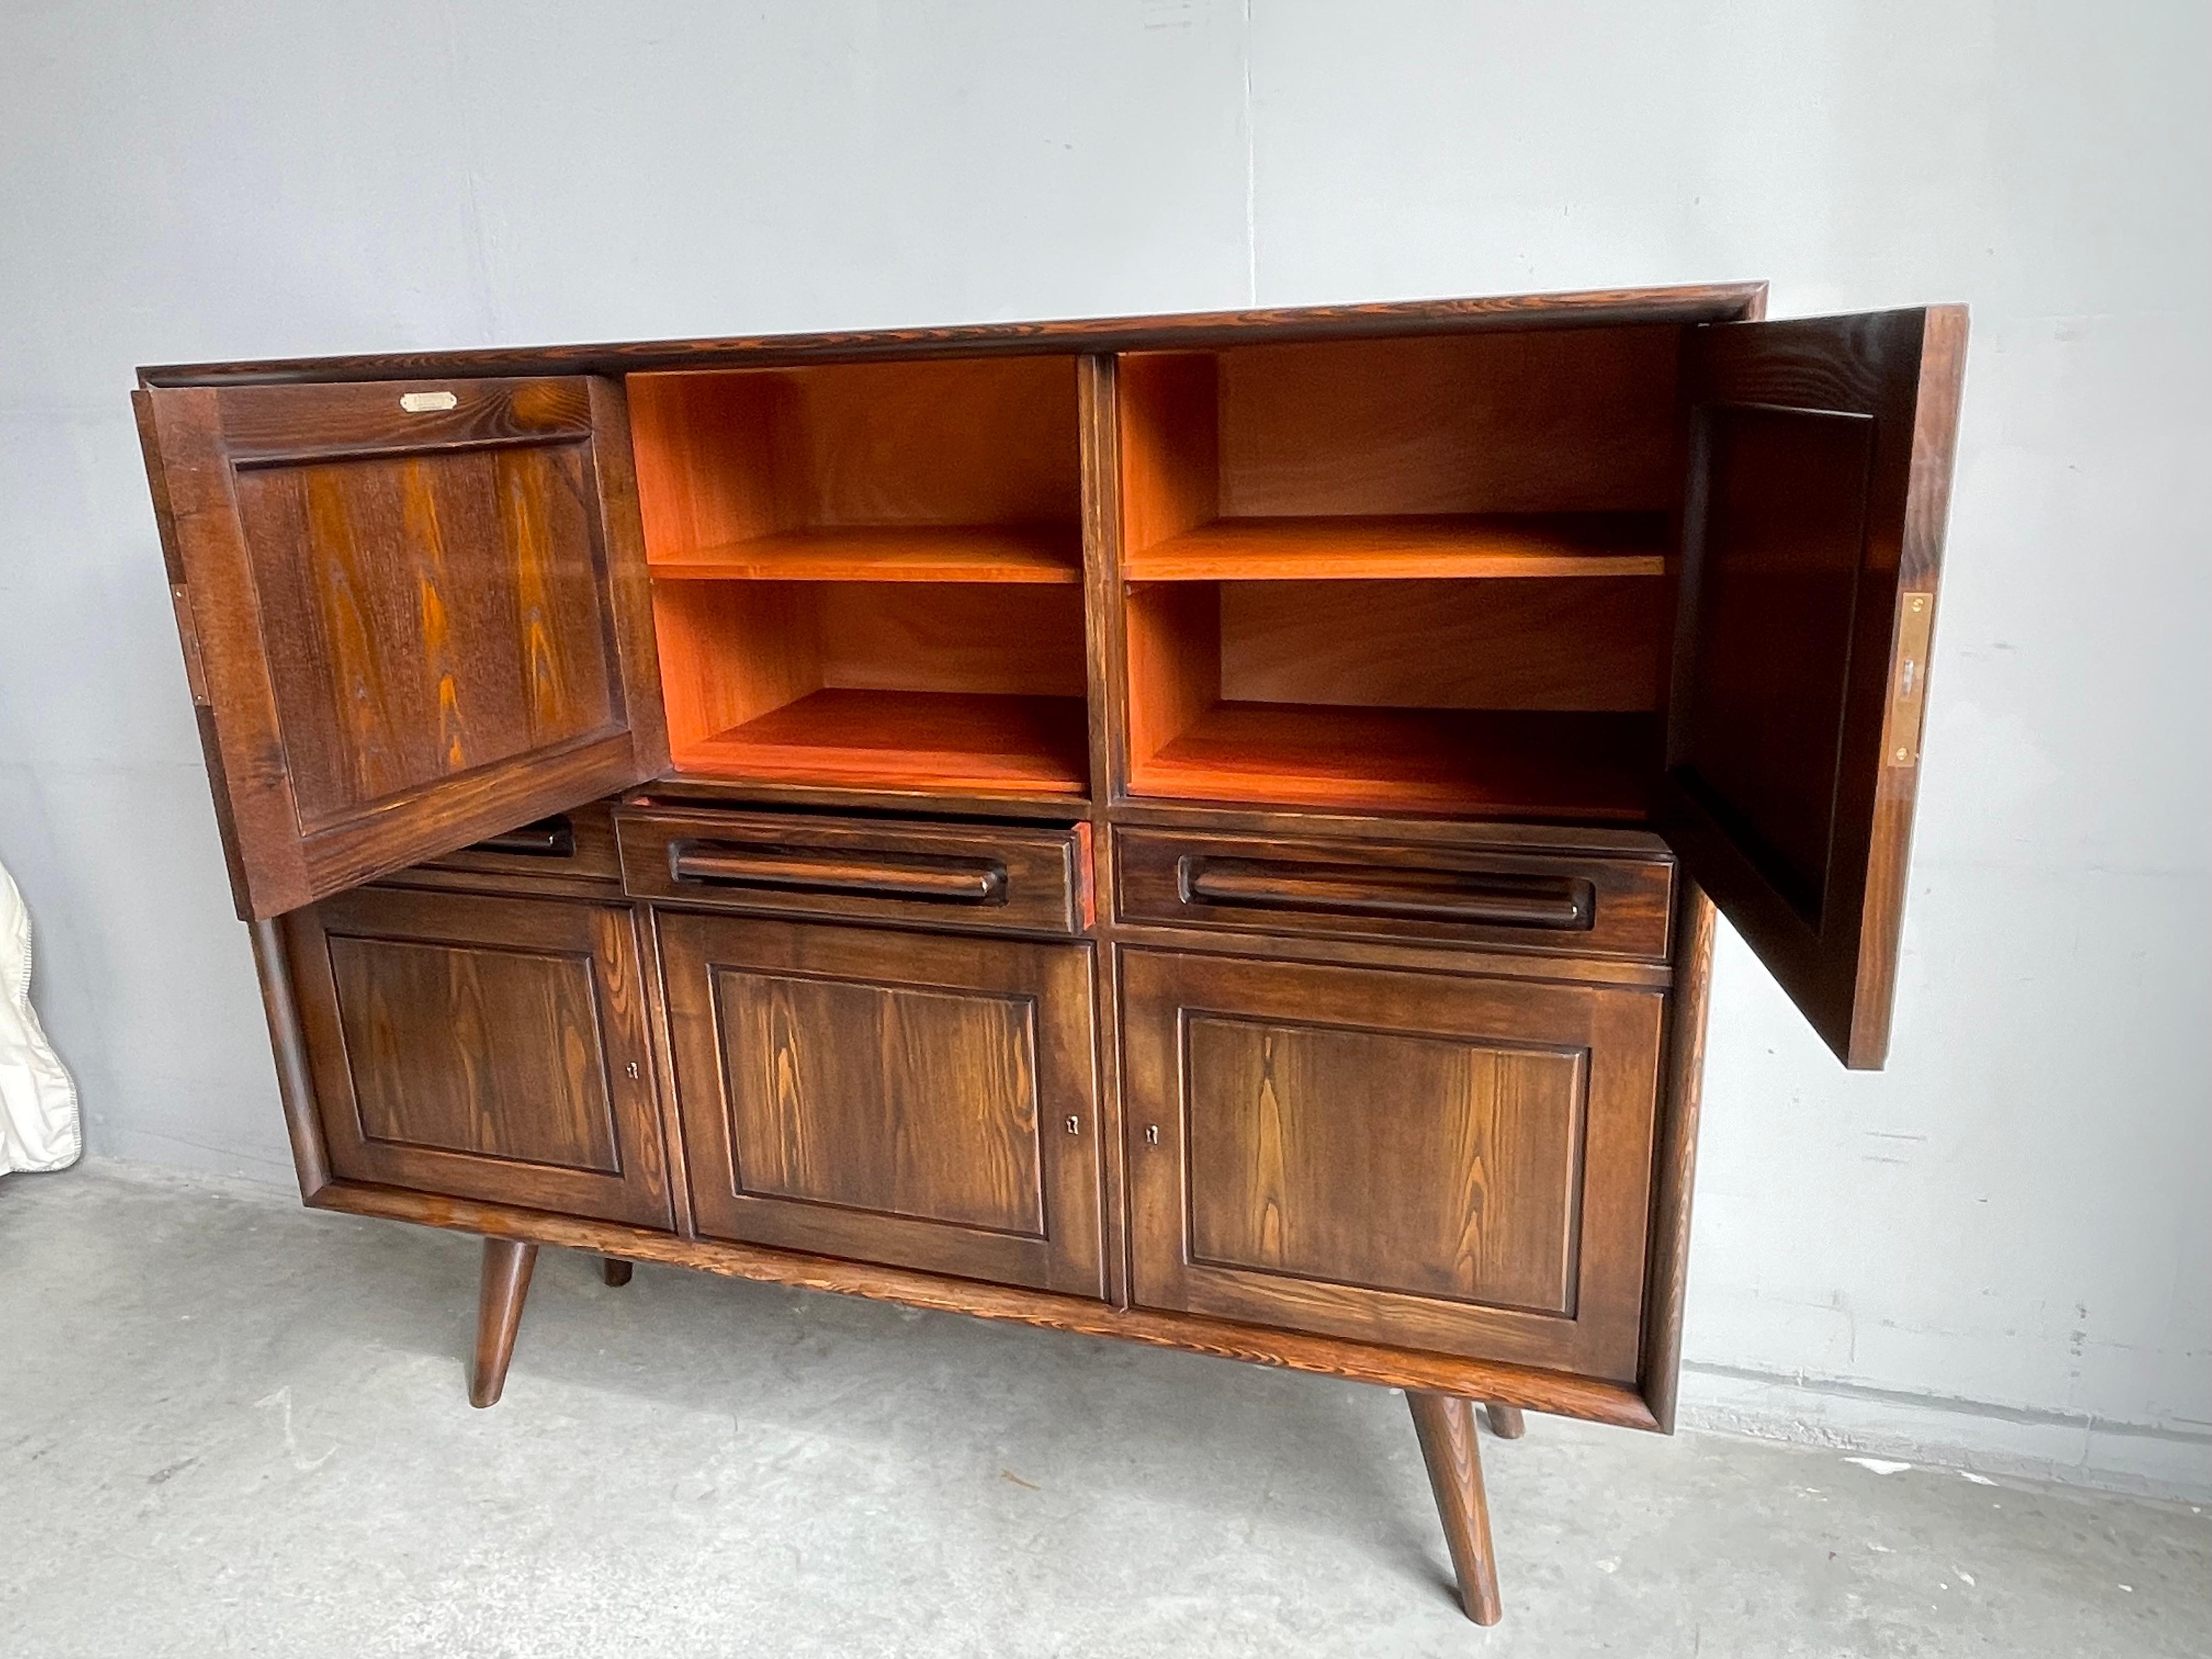 Iron Very Rare Mid-Century Modern Sideboard / Credenza by 't Woonhuys of Amsterdam For Sale